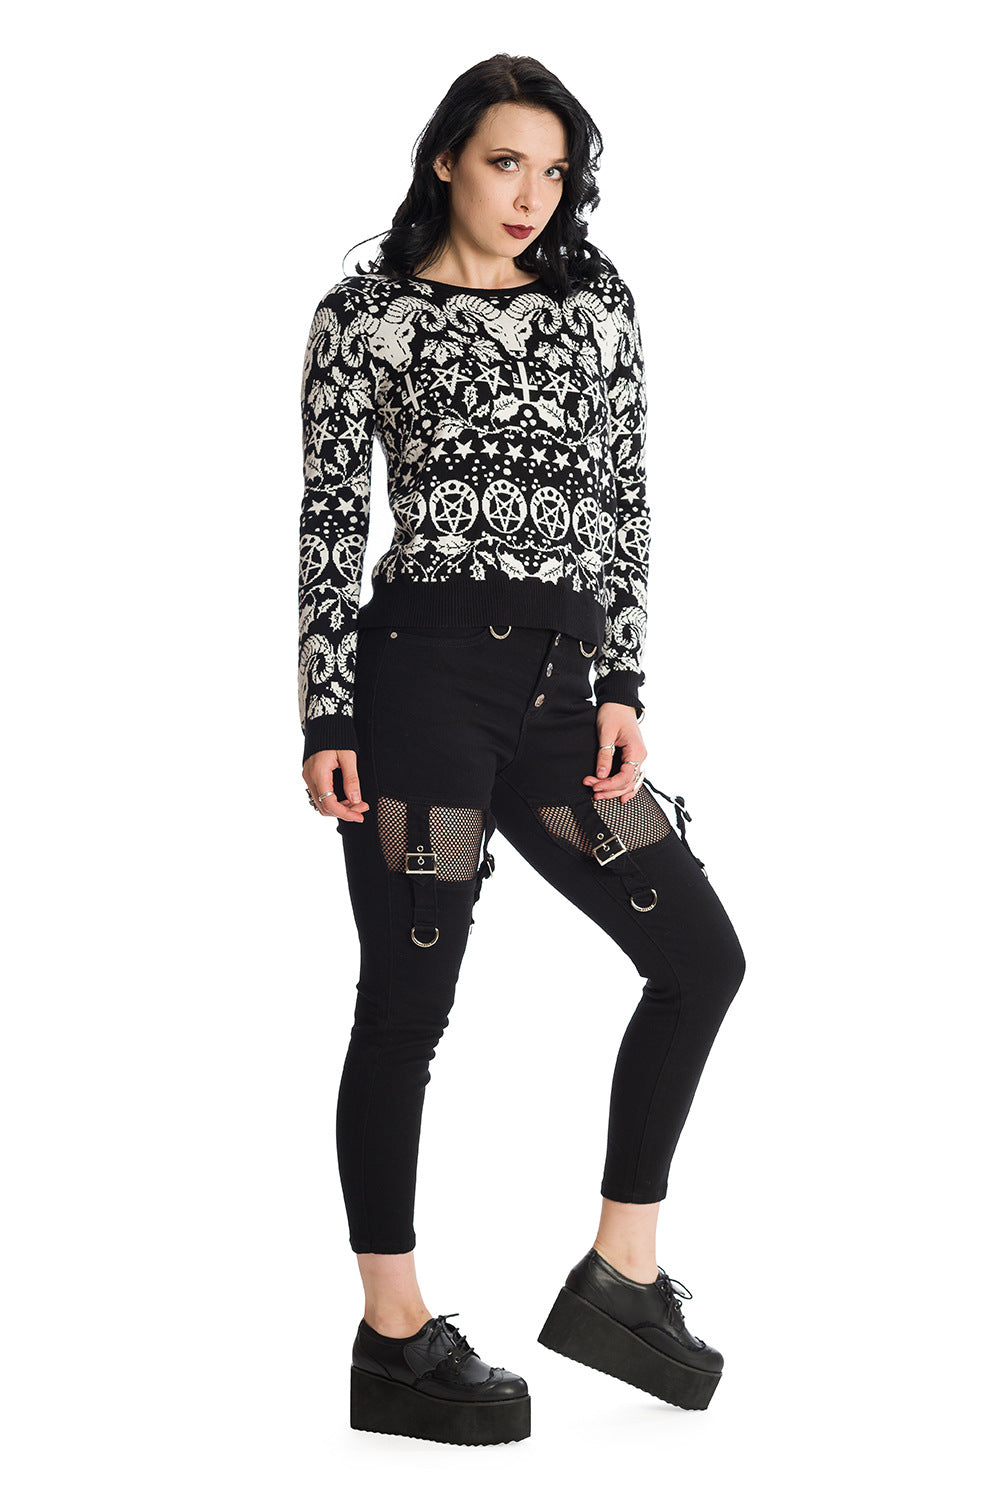 Model wearing black satanic printed jumper with Mid rise black trousers with black mesh cut outs on the thighs and strap details 